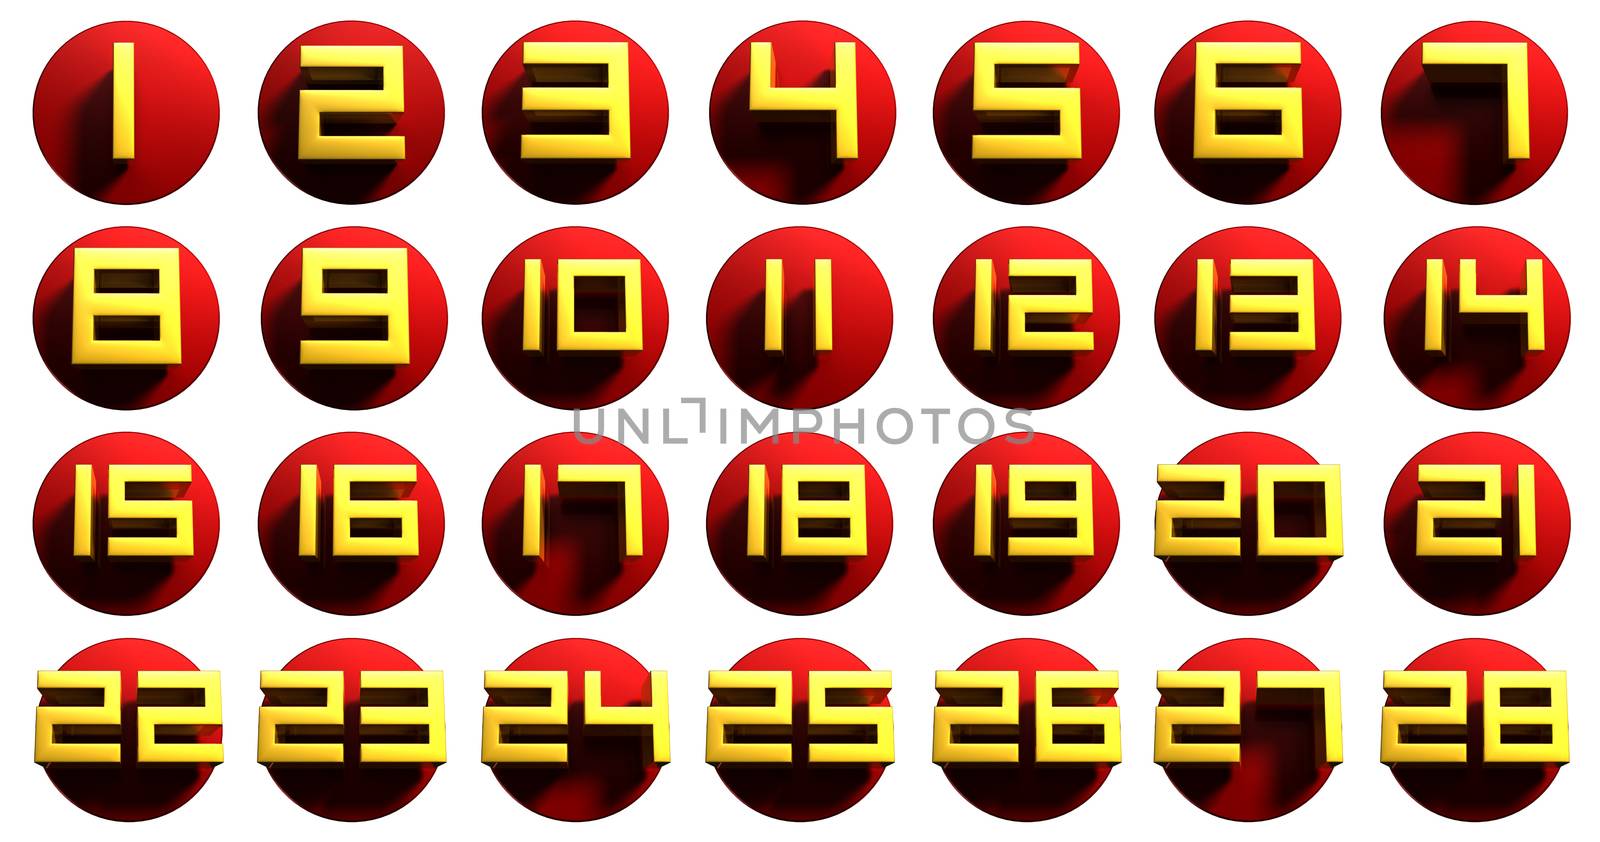 Numbers collection 1-28 3D rendering Small size 6 cm.Resoluton 300 ppi.With Clipping Path.